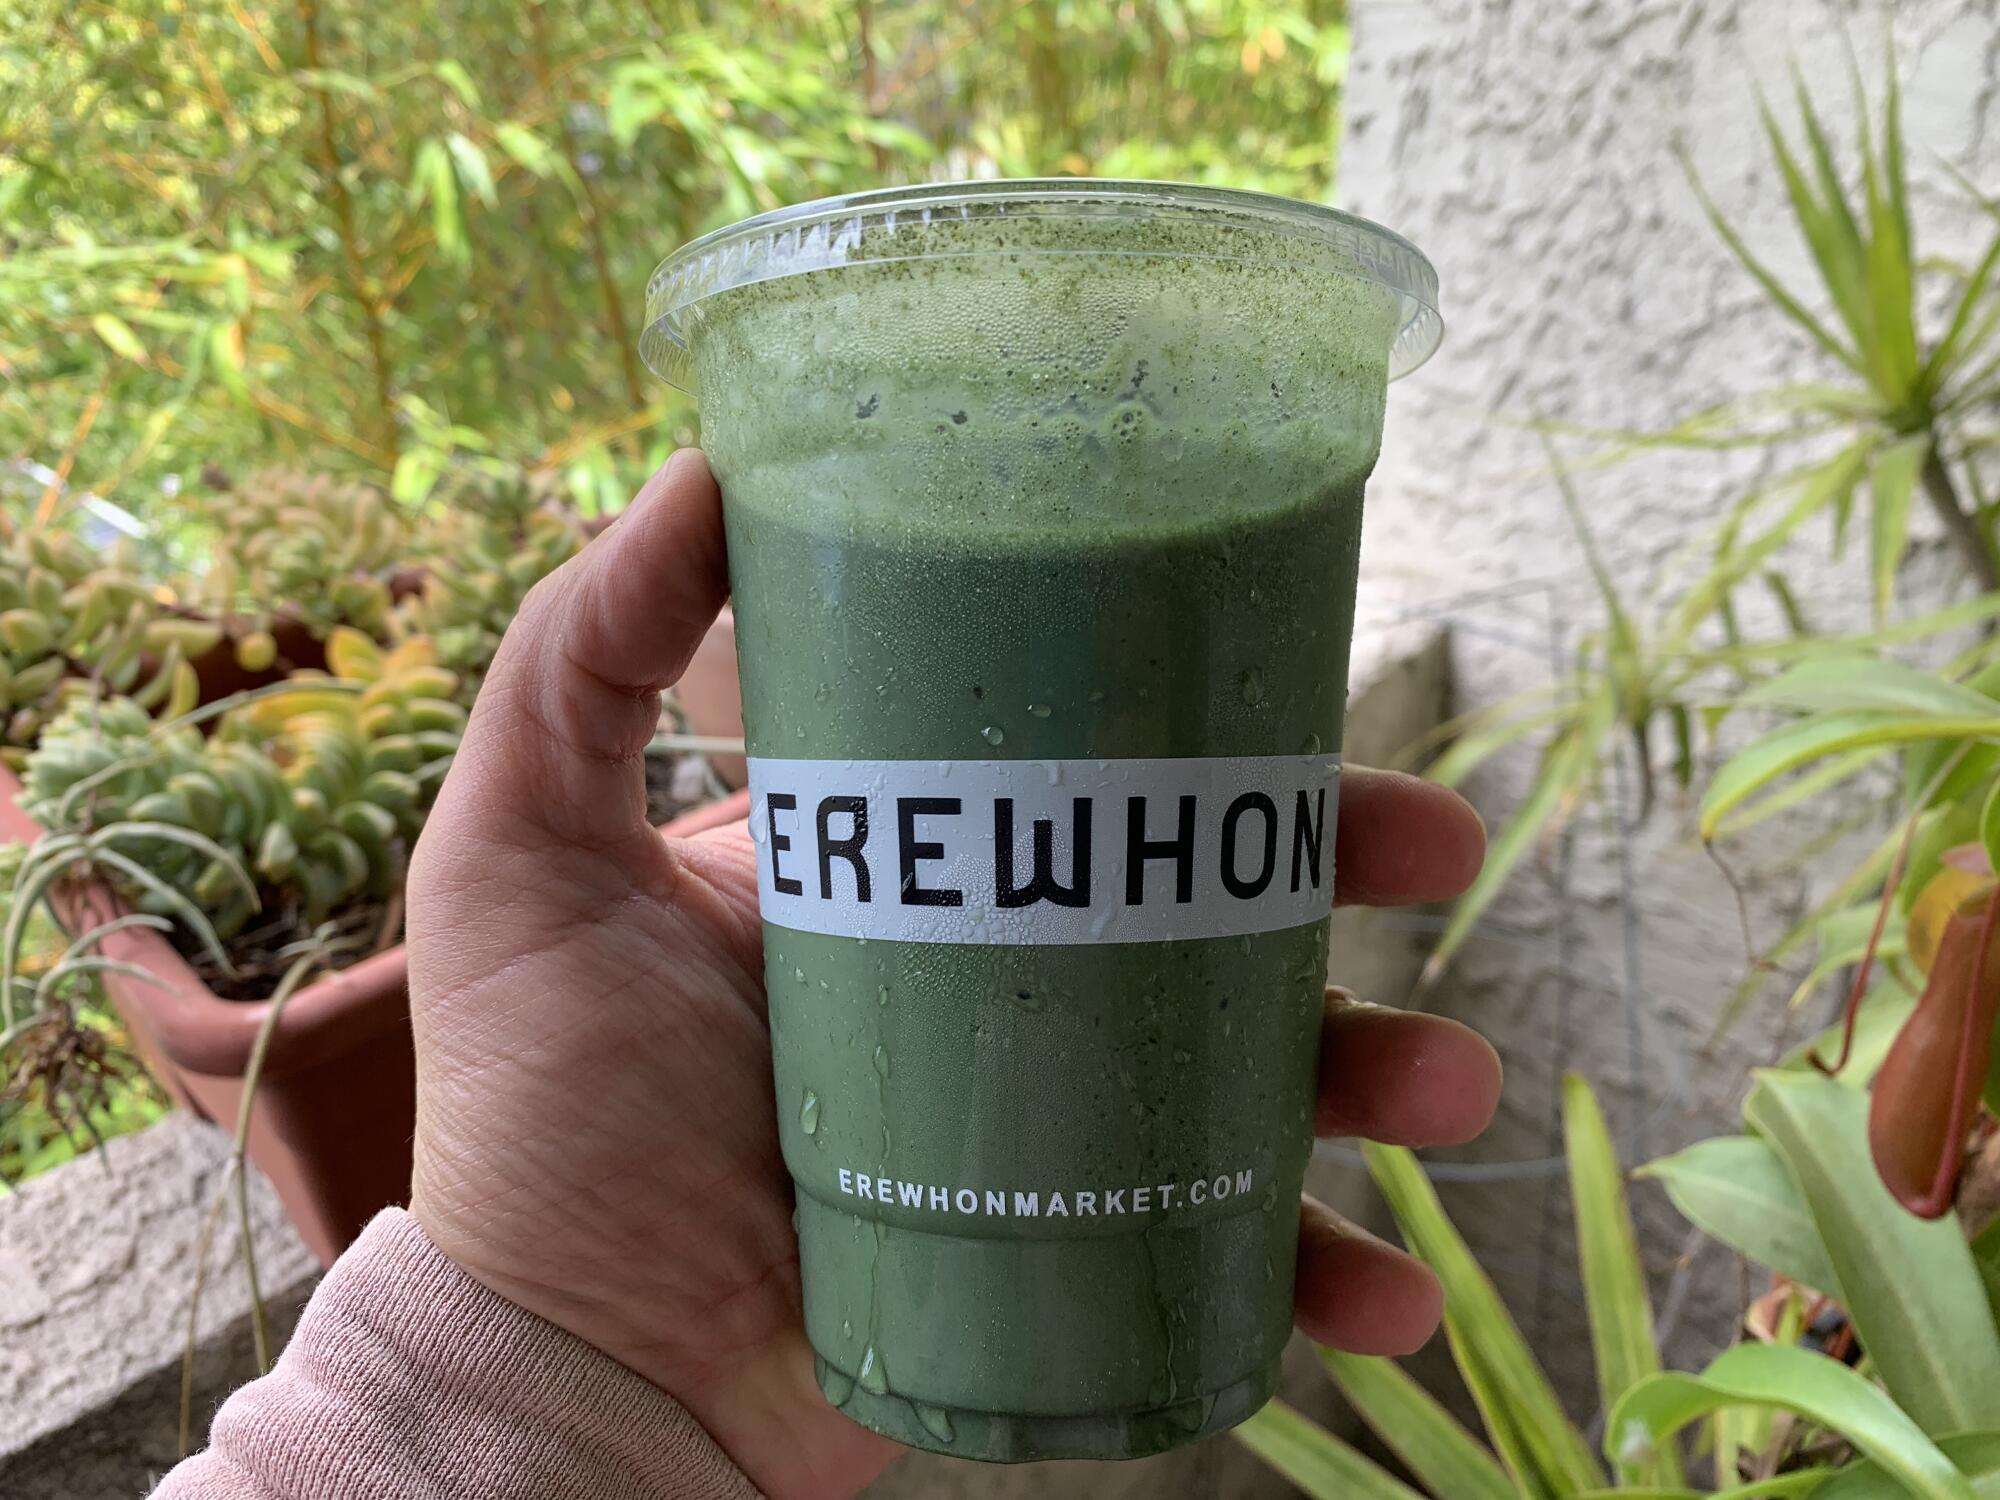 A hand holds a green smoothie in a plastic cup that says Erewhon.